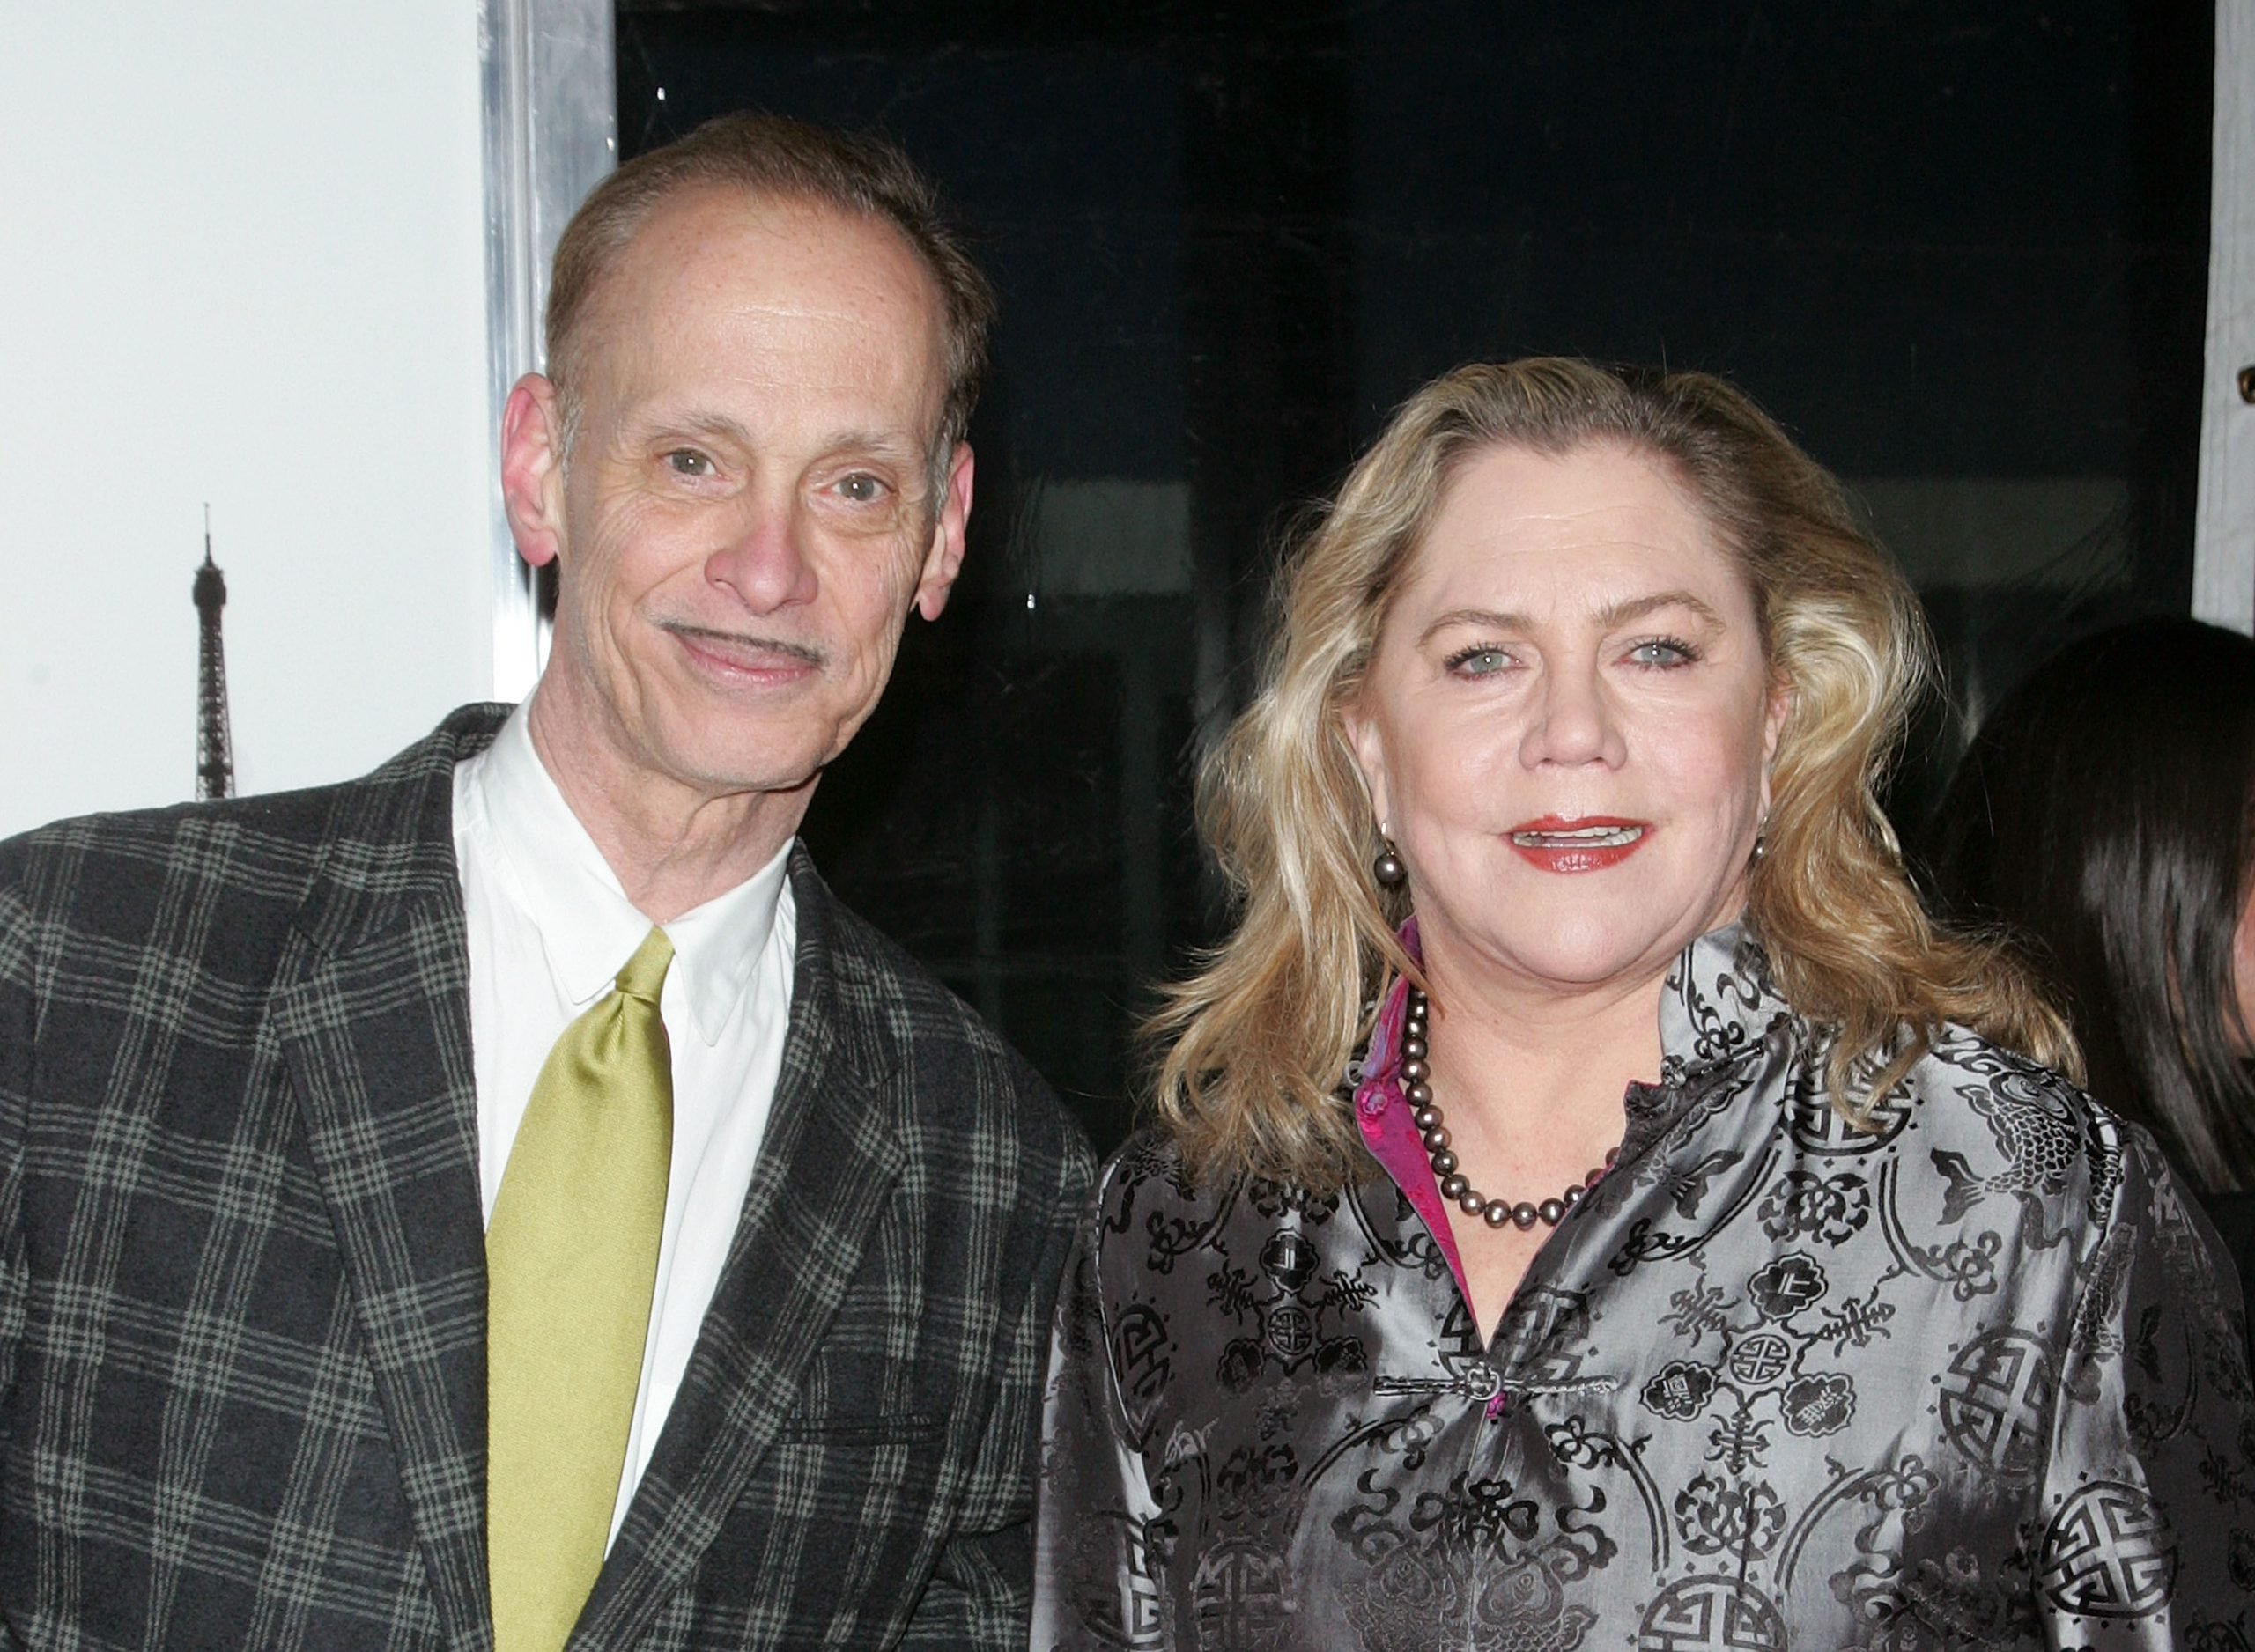 John Waters and Kathleen Turner attend the "From Paris With Love" premiere at the Ziegfeld Theatre